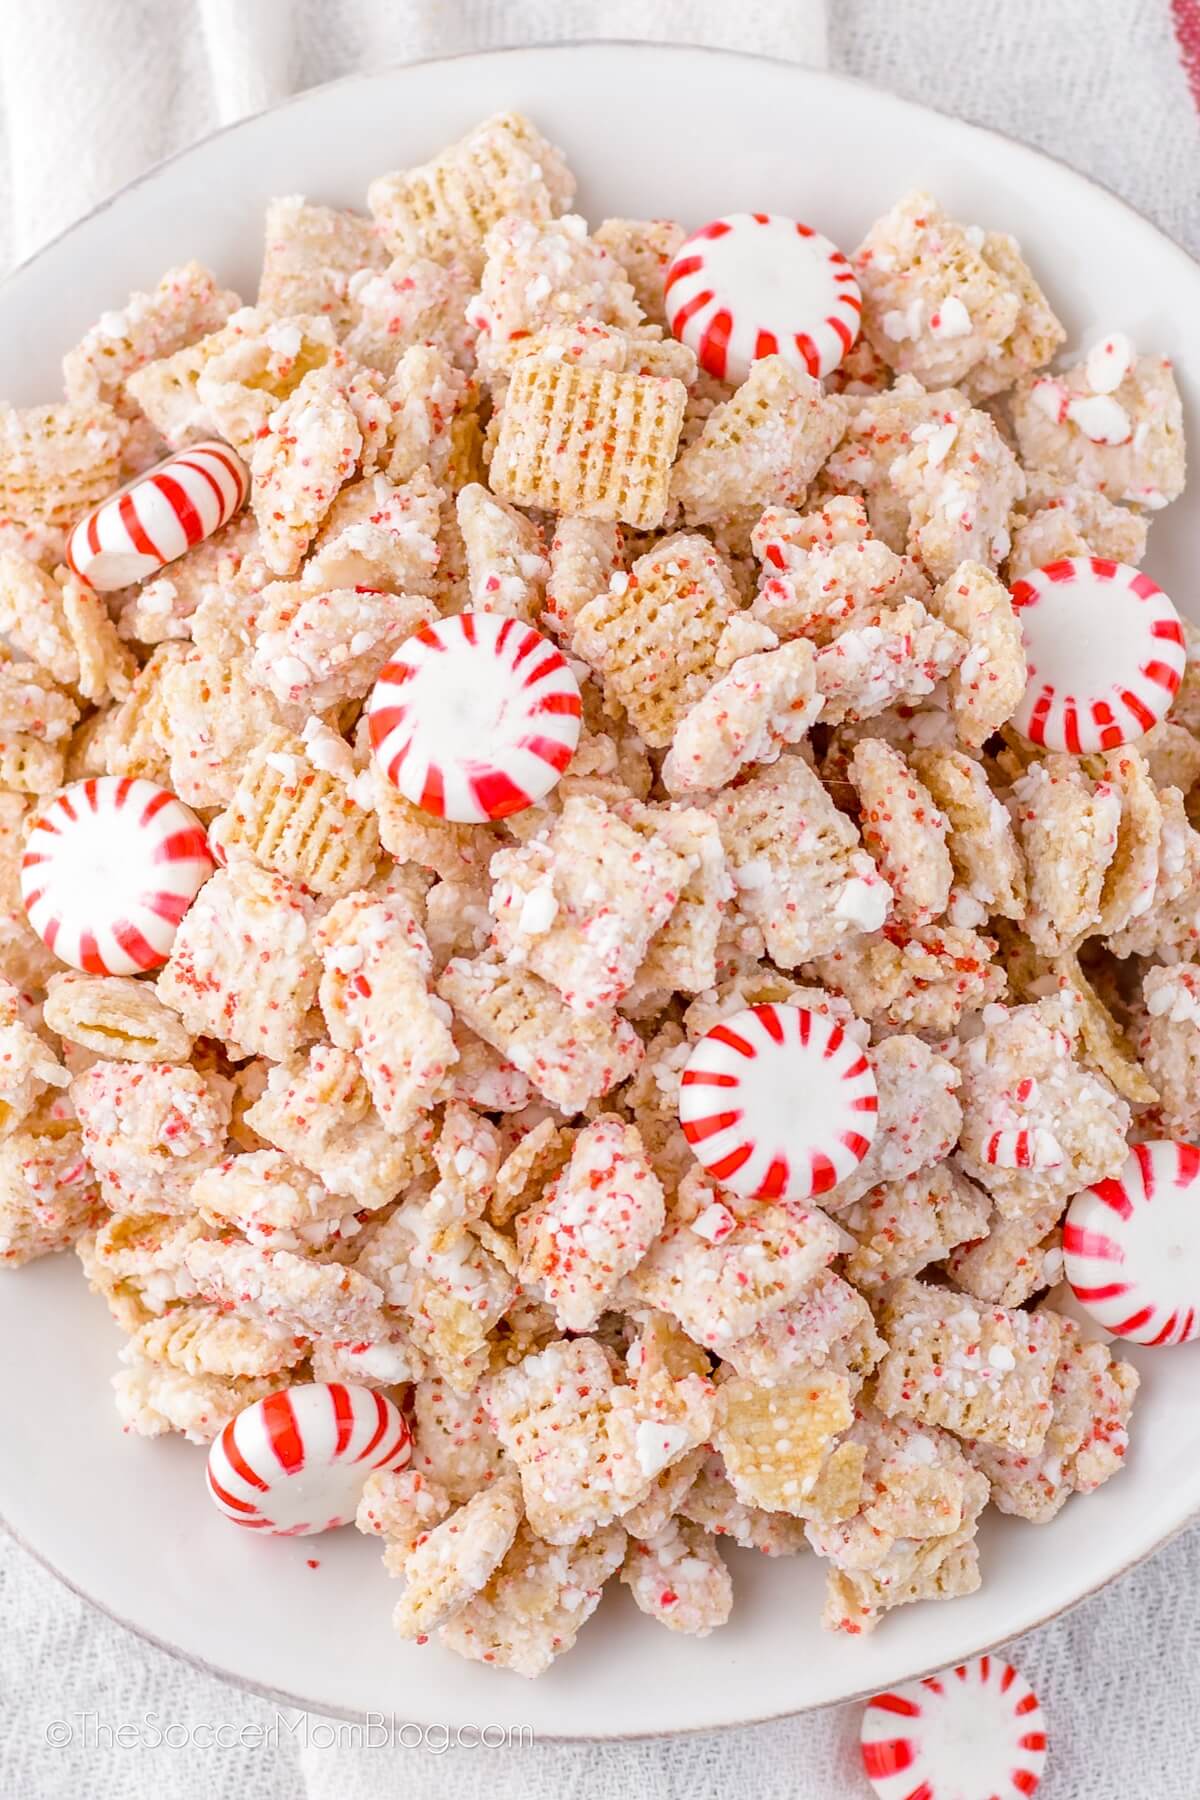 TOP DOWN VIEW OF A BOWL OF CANDY CANE COATED CHEX MIX.